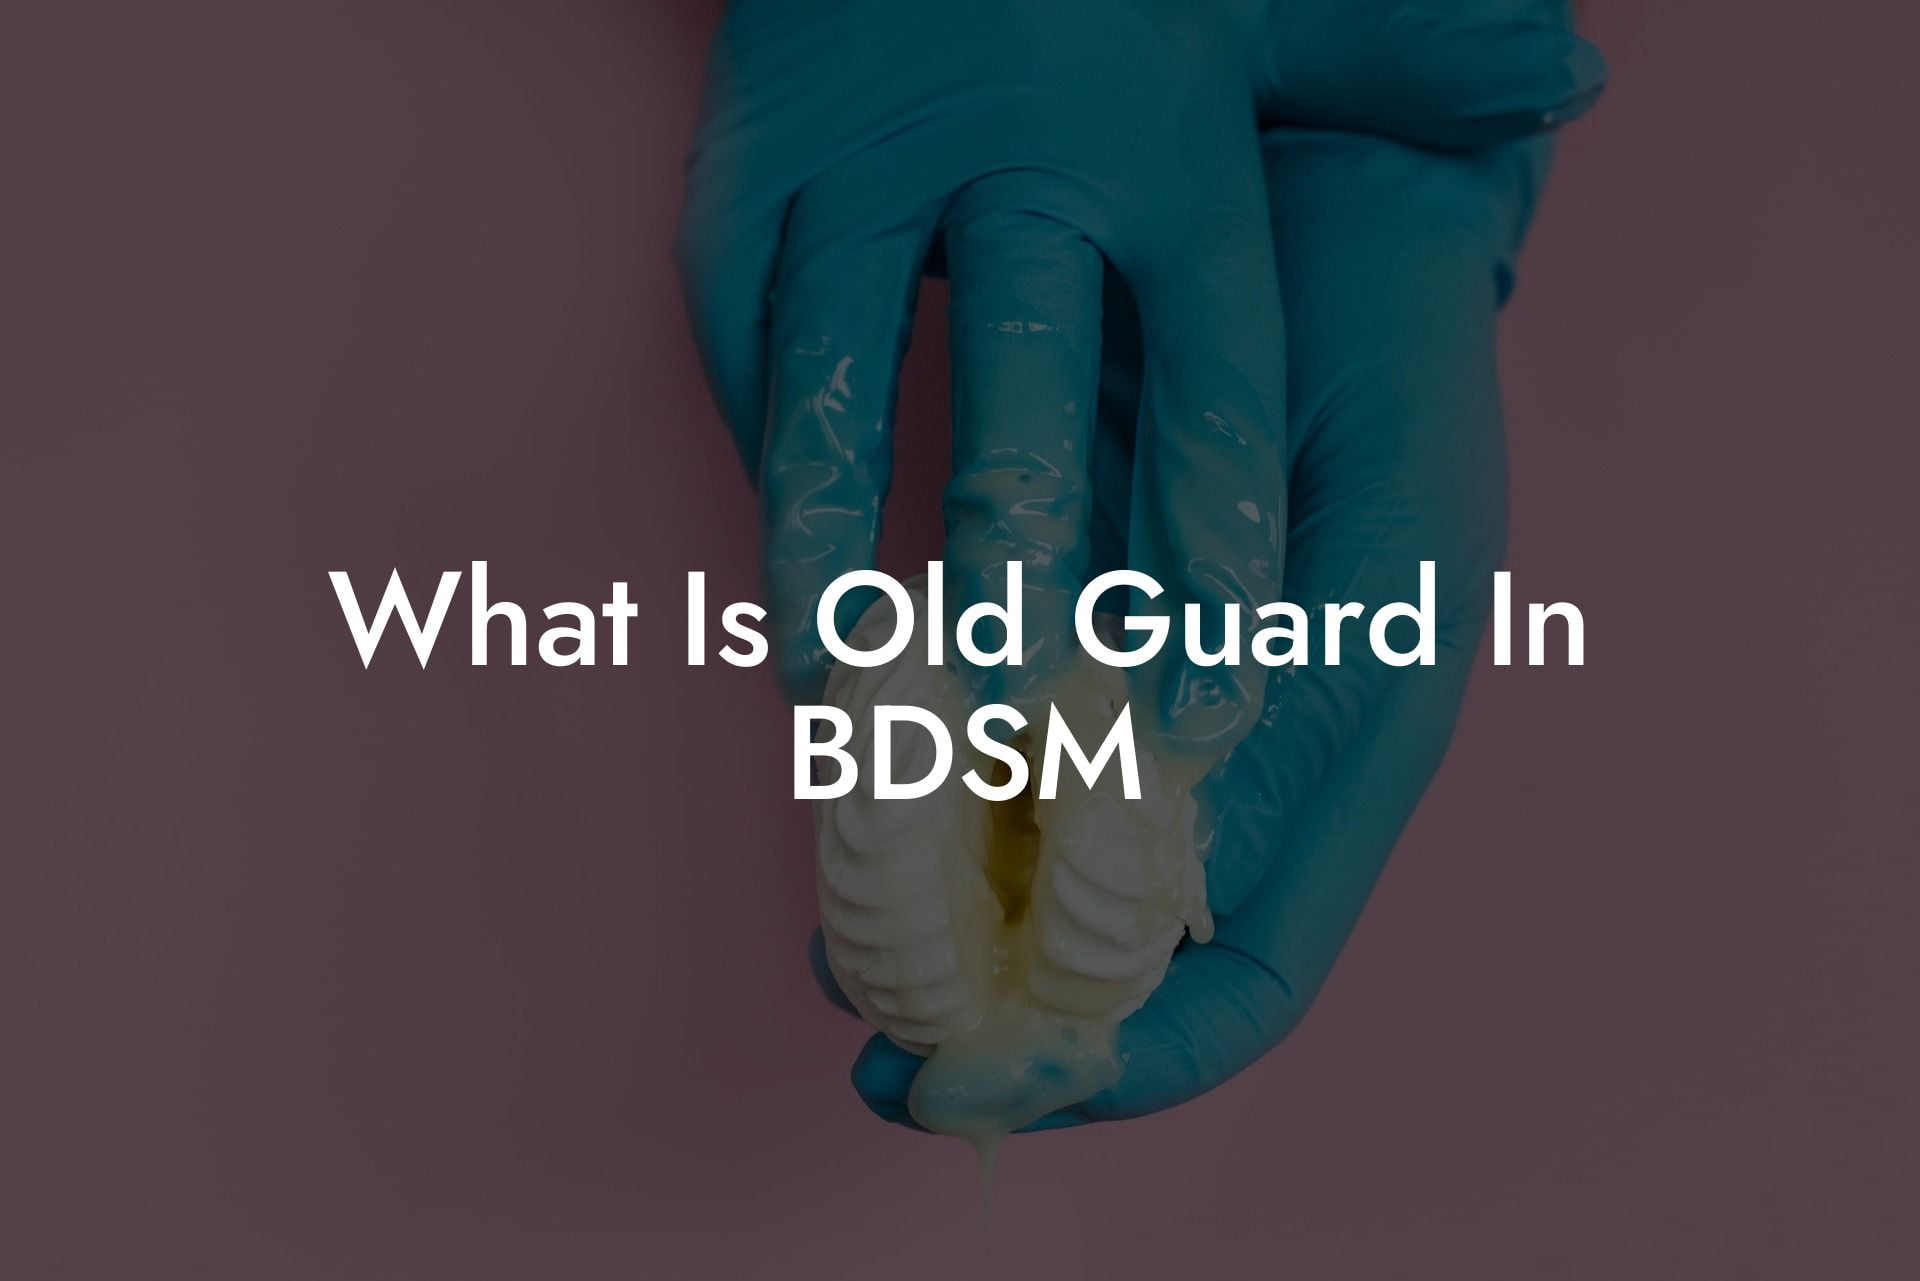 What Is Old Guard In BDSM